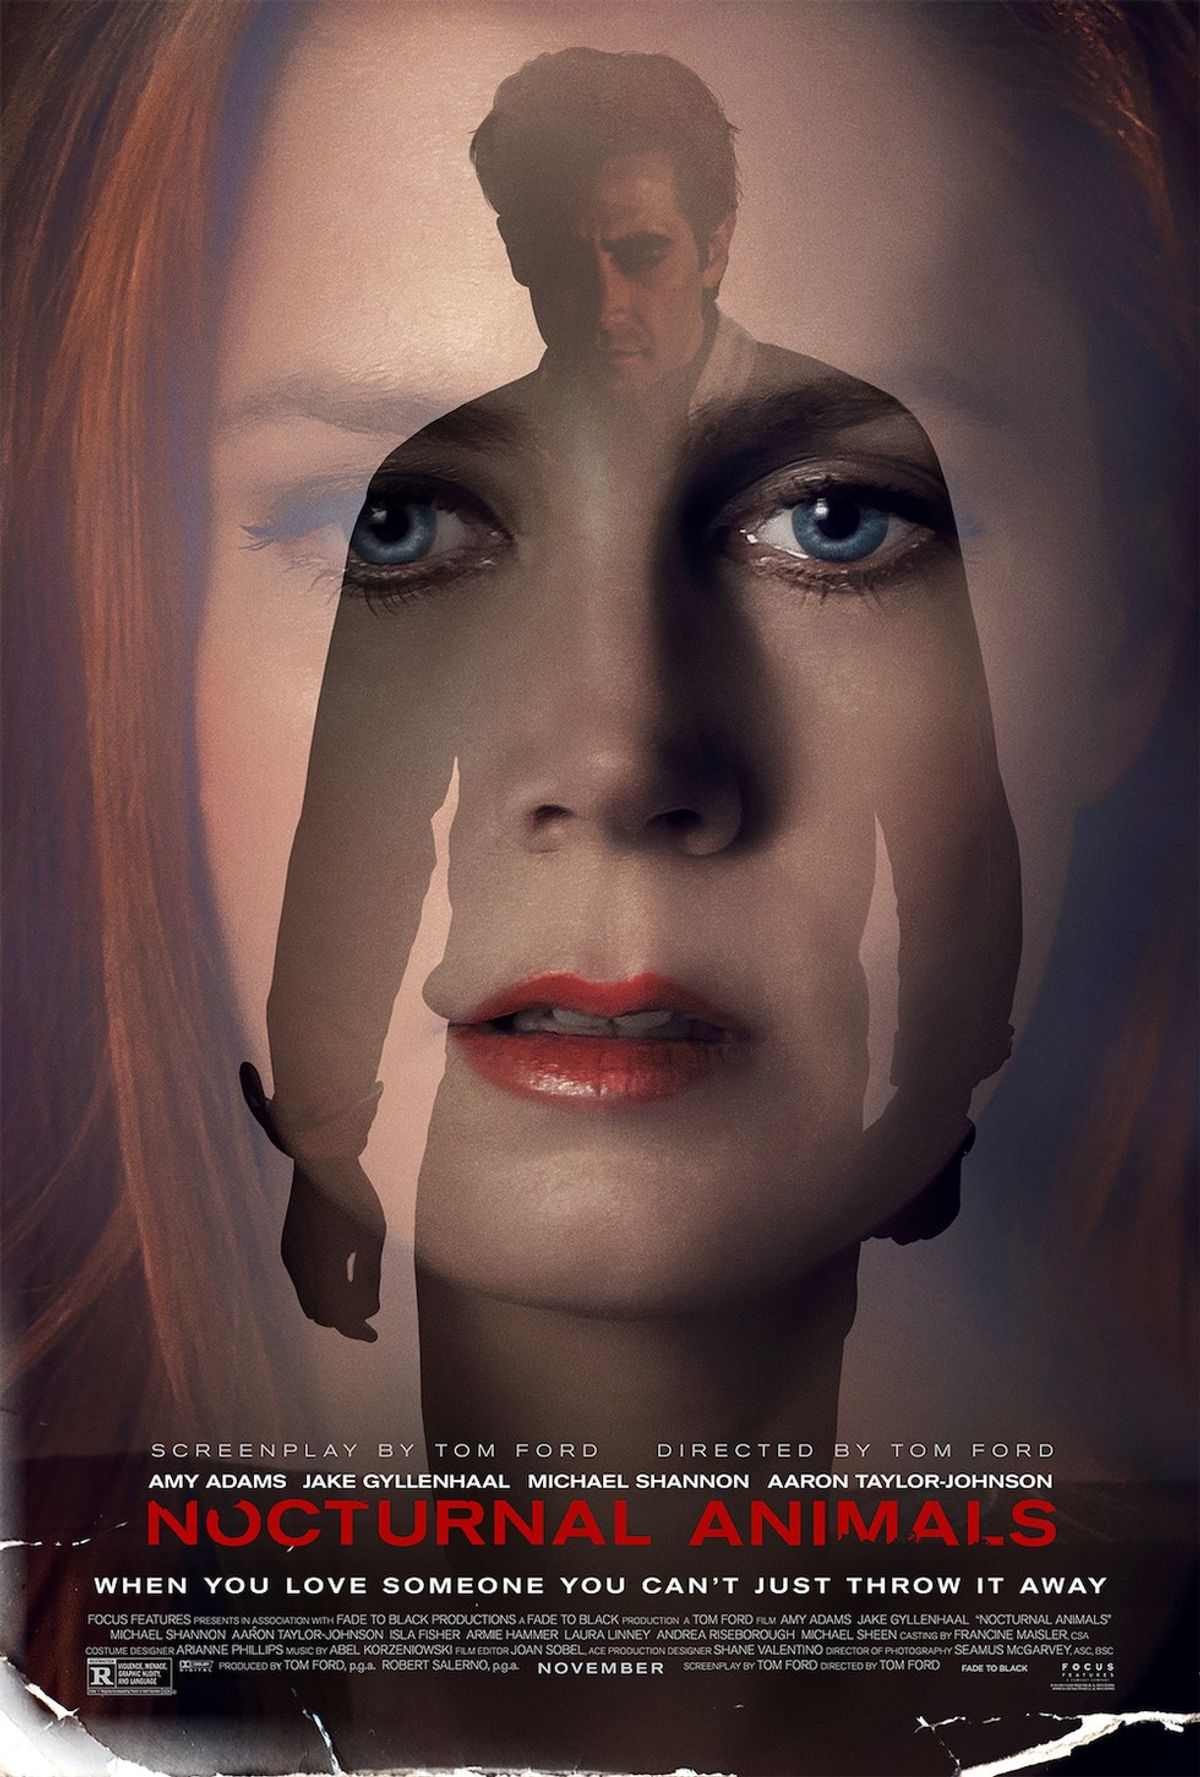 Nocturnal Animals (2016): A Review